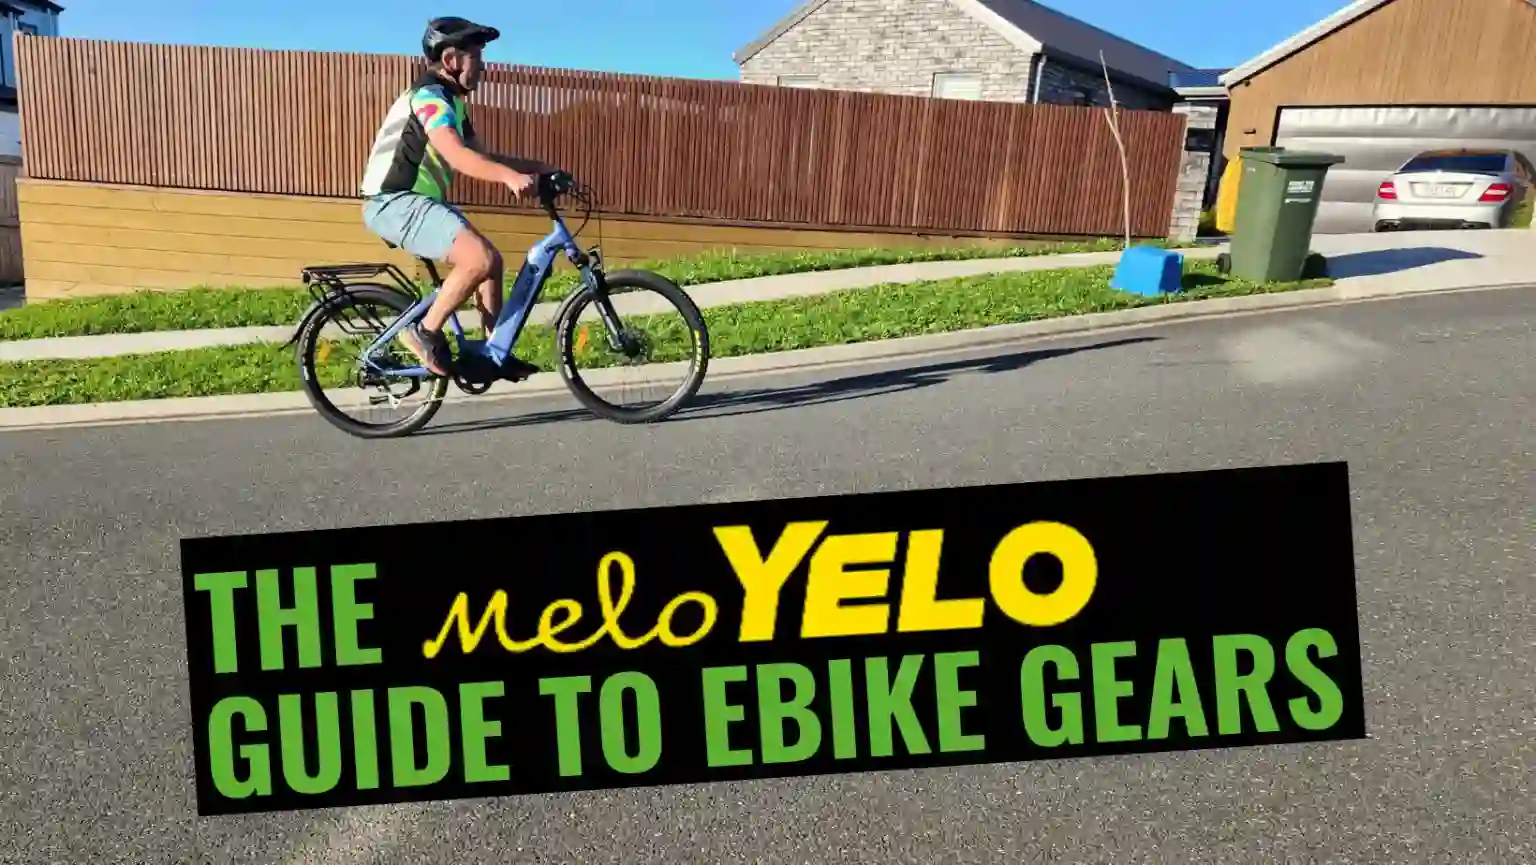 HOW TO USE GEARS ON AN ELECTRIC BIKE